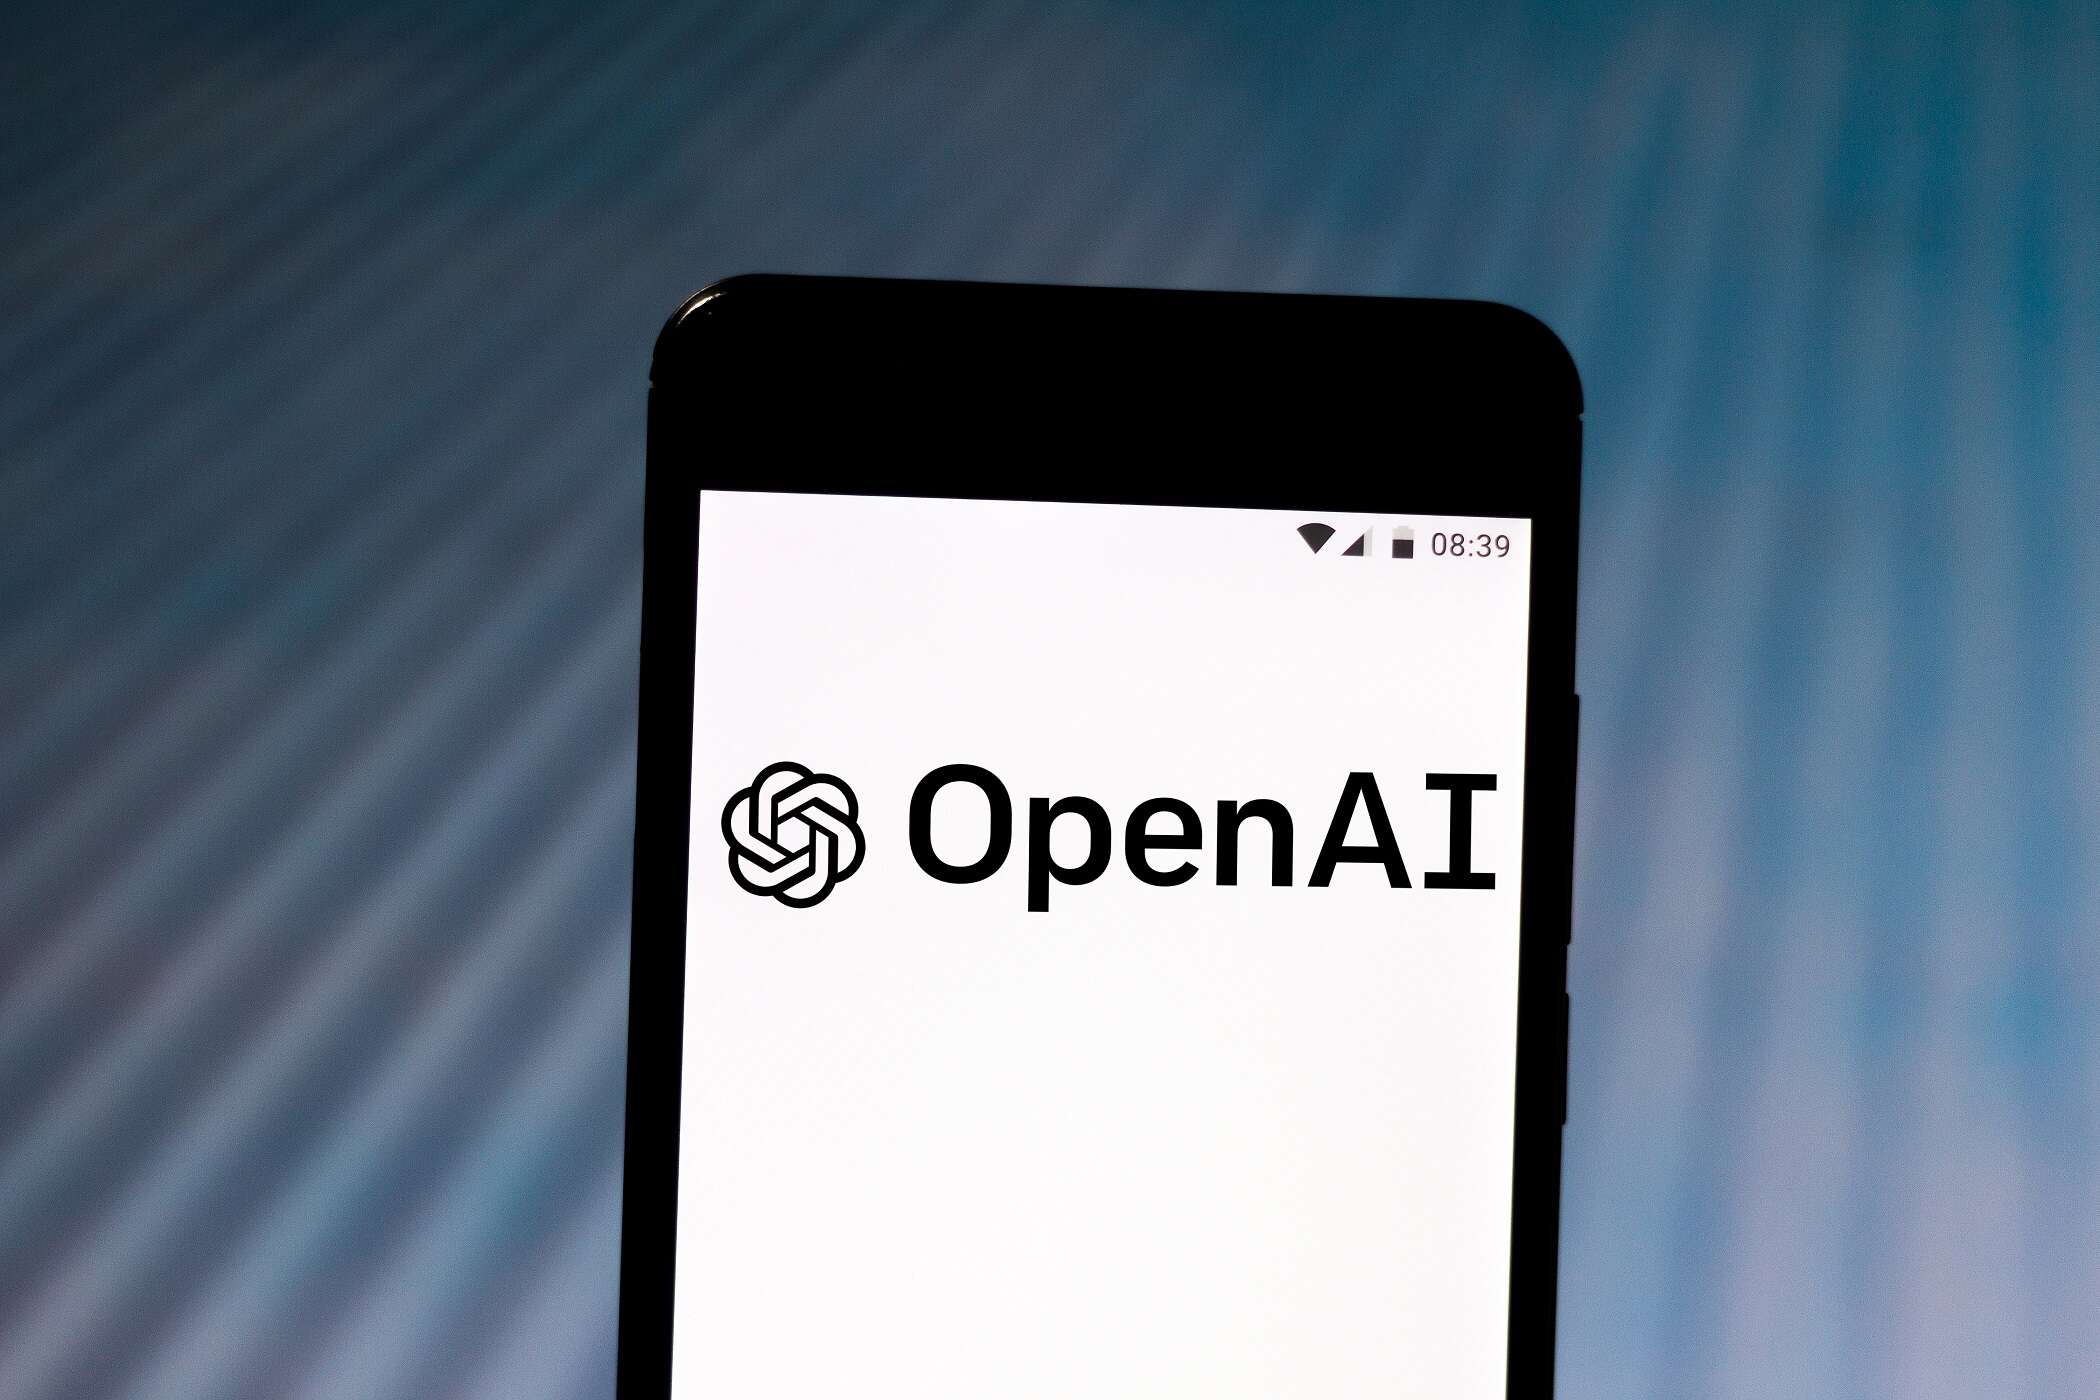 OpenAI's GPT-3 has been a game changer for NLP. But will the EU's AI rules limit its potential?